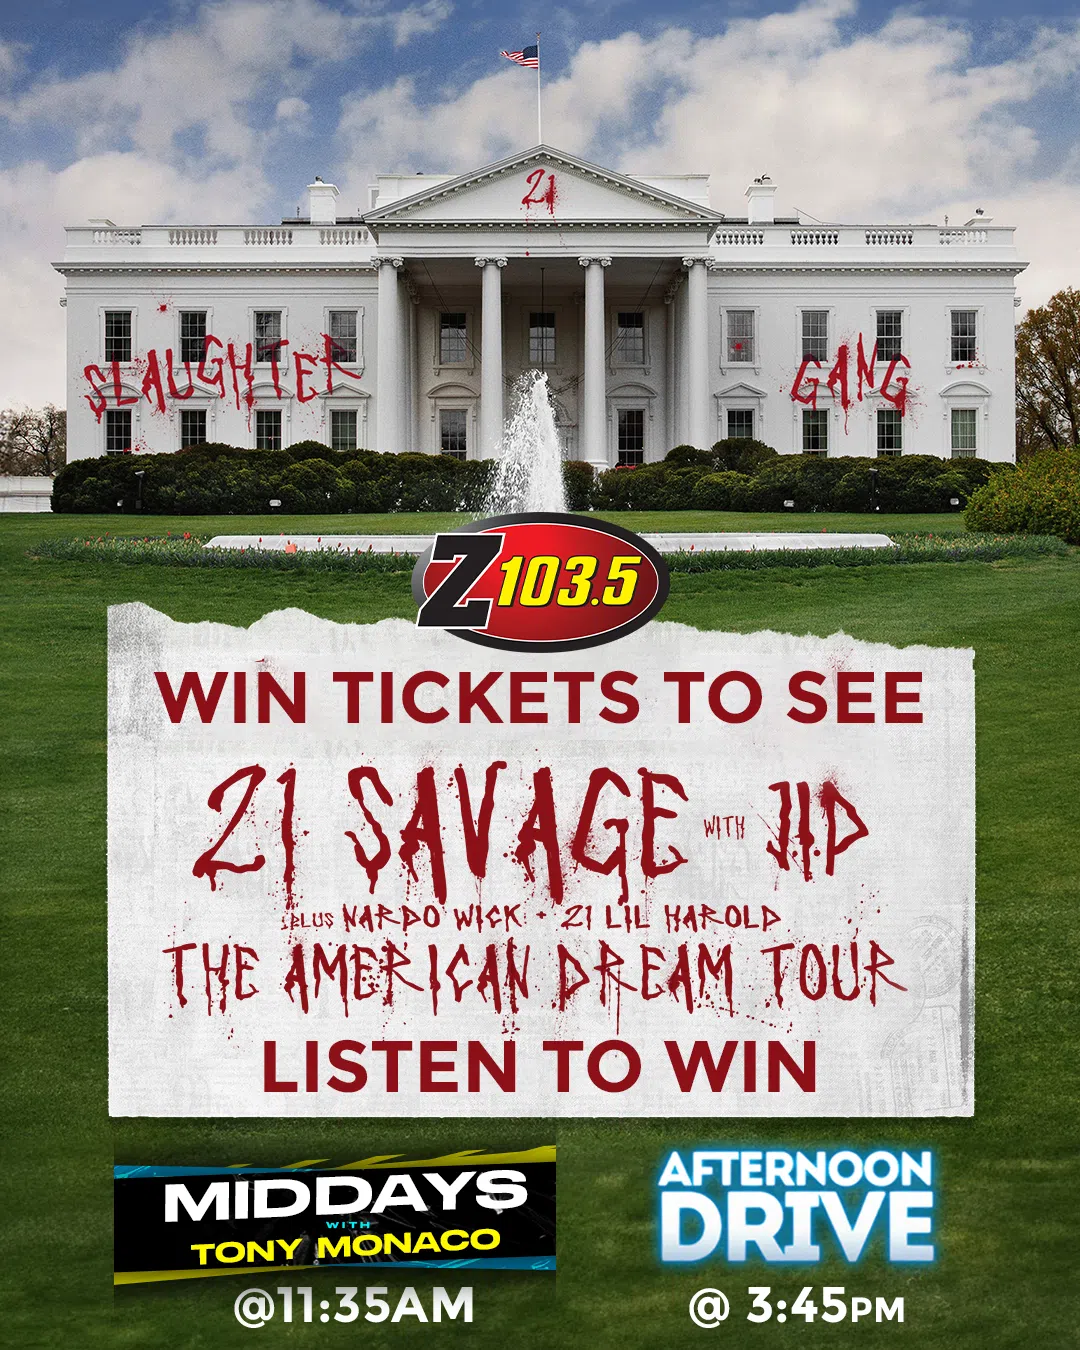 Feature: https://z1035.com/win/win-tickets-to-see-21-savage-on-may-27th/